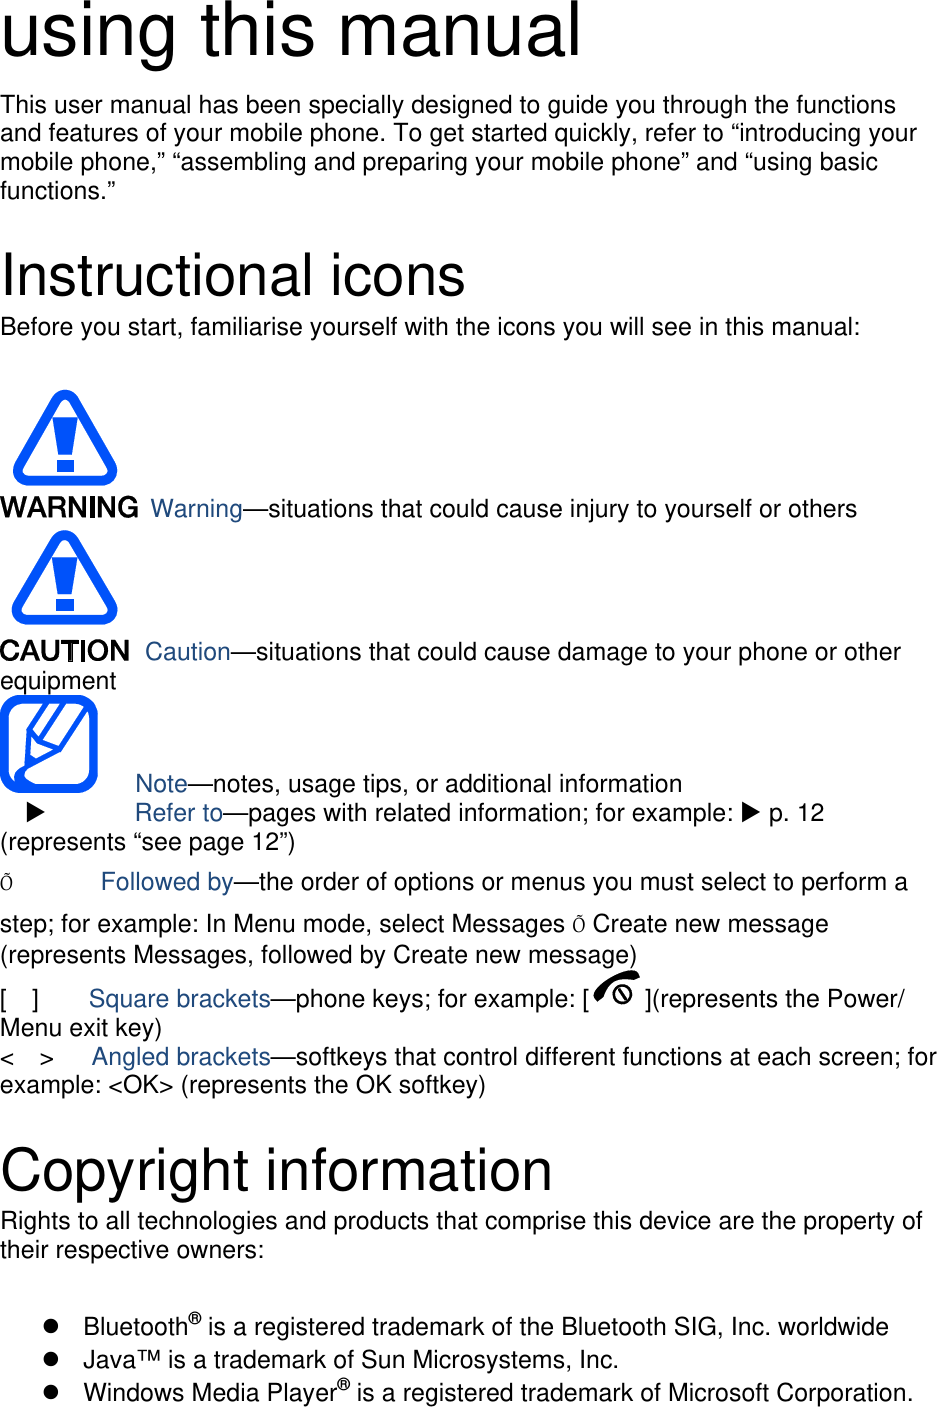 using this manual This user manual has been specially designed to guide you through the functions and features of your mobile phone. To get started quickly, refer to “introducing your mobile phone,” “assembling and preparing your mobile phone” and “using basic functions.”  Instructional icons Before you start, familiarise yourself with the icons you will see in this manual:     Warning—situations that could cause injury to yourself or others  Caution—situations that could cause damage to your phone or other equipment    Note—notes, usage tips, or additional information          Refer to—pages with related information; for example:  p. 12 (represents “see page 12”) Õ       Followed by—the order of options or menus you must select to perform a step; for example: In Menu mode, select Messages Õ Create new message (represents Messages, followed by Create new message) [  ]    Square brackets—phone keys; for example: [ ](represents the Power/ Menu exit key) &lt;  &gt;   Angled brackets—softkeys that control different functions at each screen; for example: &lt;OK&gt; (represents the OK softkey)  Copyright information Rights to all technologies and products that comprise this device are the property of their respective owners:   Bluetooth® is a registered trademark of the Bluetooth SIG, Inc. worldwide   Java™ is a trademark of Sun Microsystems, Inc.  Windows Media Player® is a registered trademark of Microsoft Corporation. 